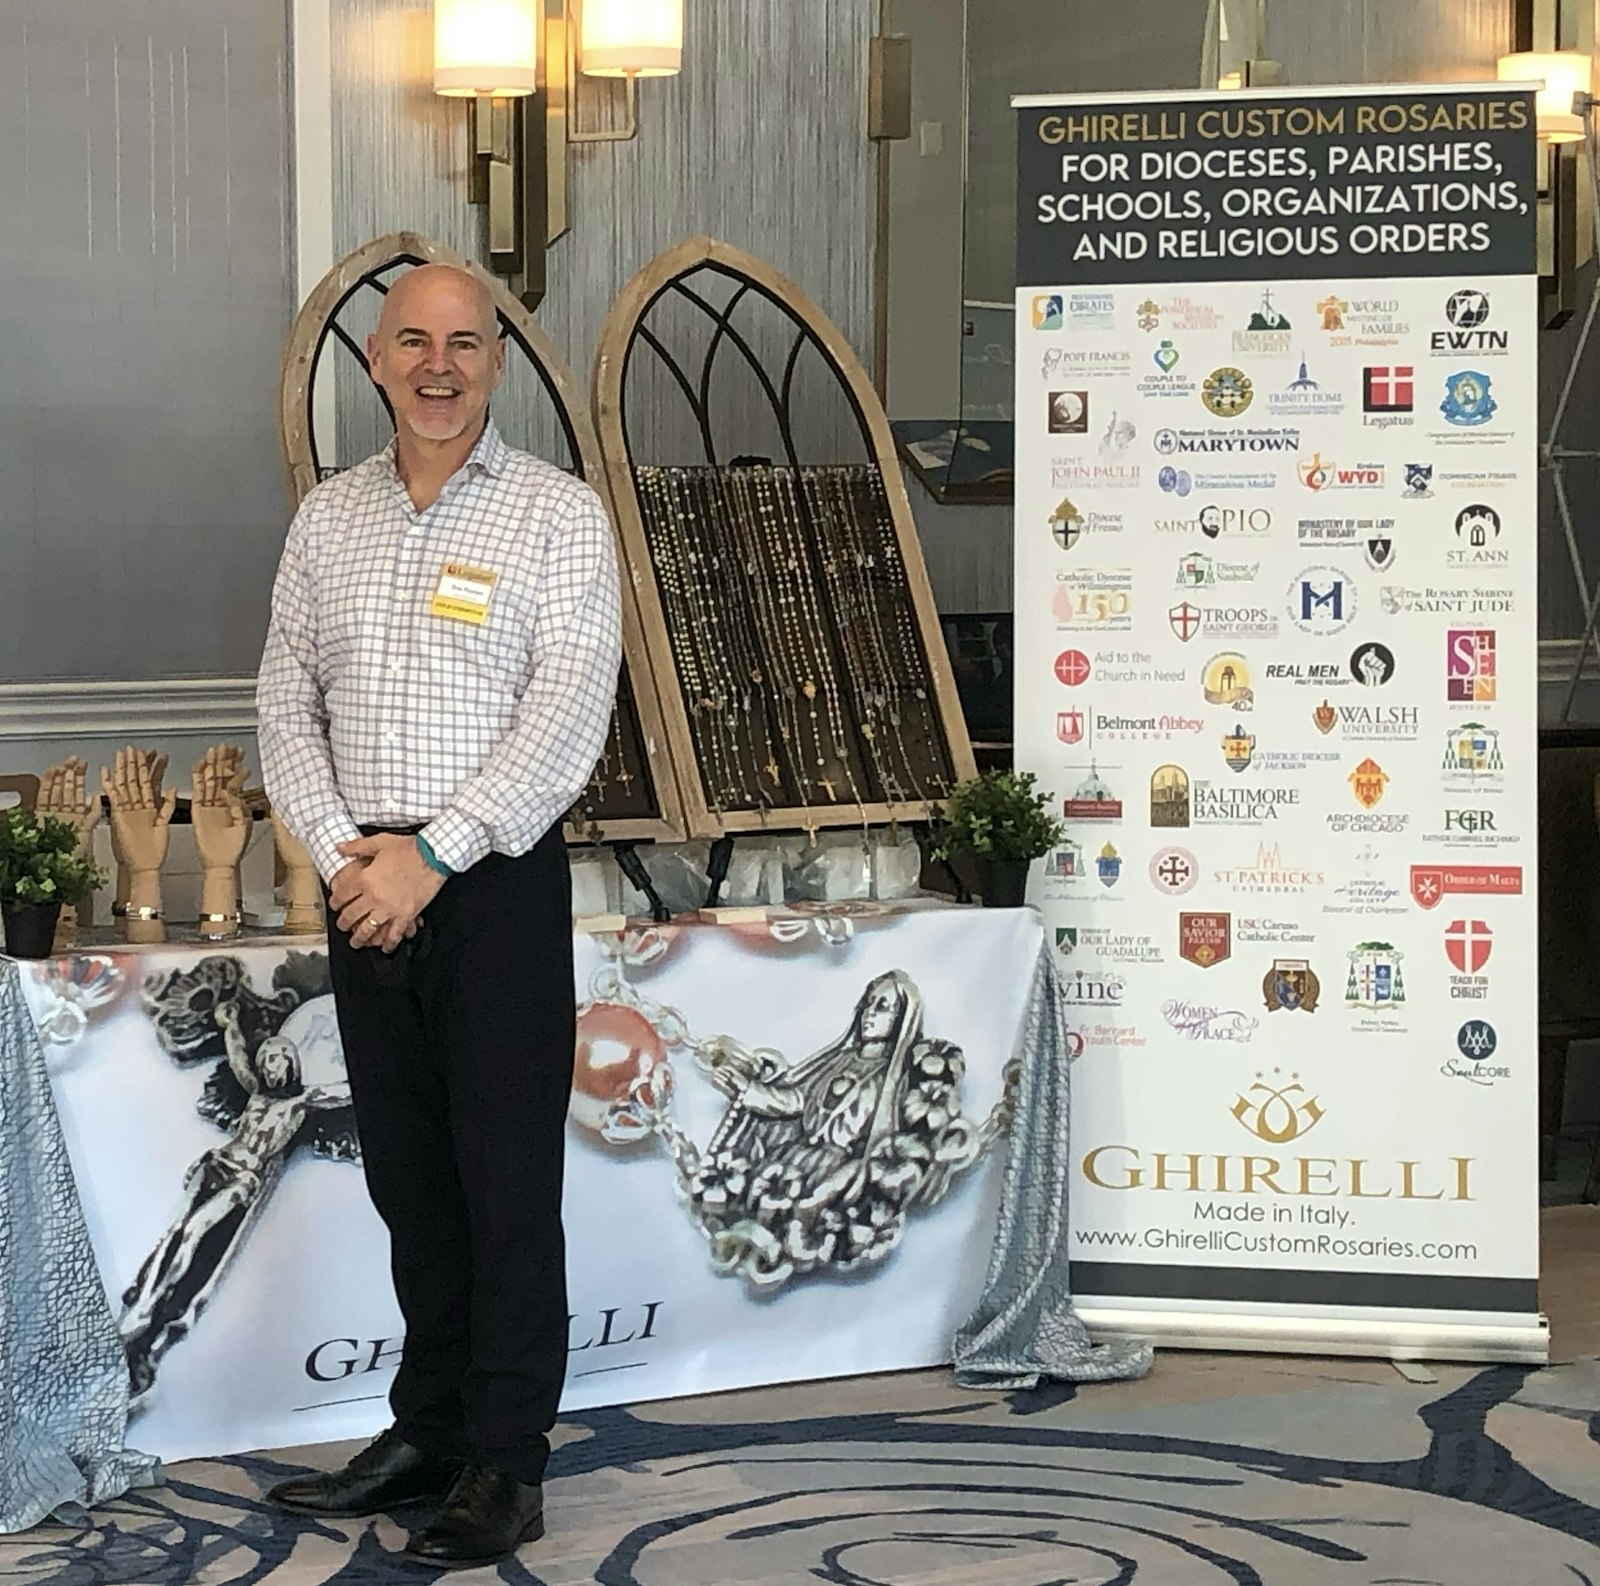 Metro Detroit native Dino Piccinini is the managing director of U.S. sales for Ghirelli, an Italian custom rosary designer. Piccinini said Ghirelli works with parishes, families and schools to craft commemorative rosaries for any occasion.